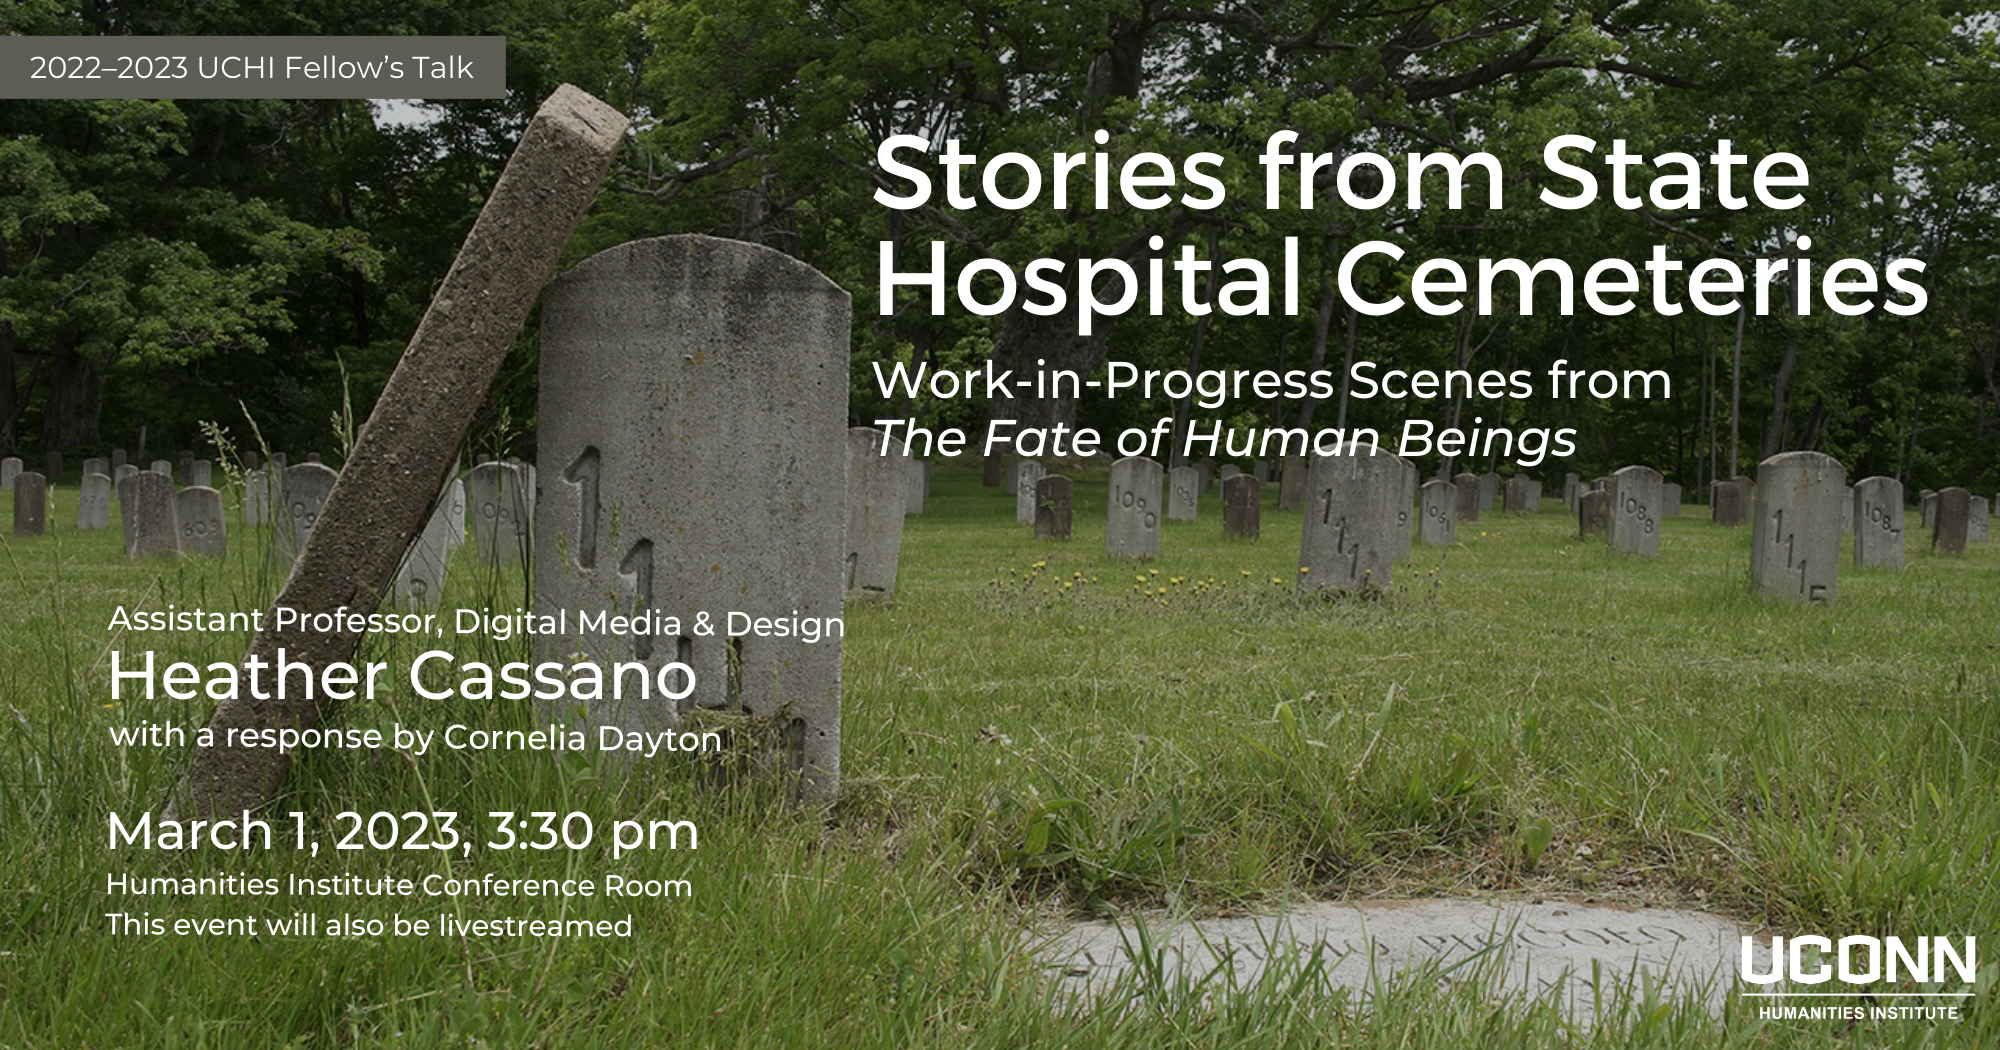 2022–2023 UCHI Fellow's Talk. "Stories from State Hospital Cemeteries: Work-in-progress scenes from The Fate of Human Beings. Assistant Professor, Digital Media and Design, Heather Cassano, with a response by Cornelia Dayton. March 1, 2023, 3:30pm. UCHI Conference Room and livestreamed on Zoom.